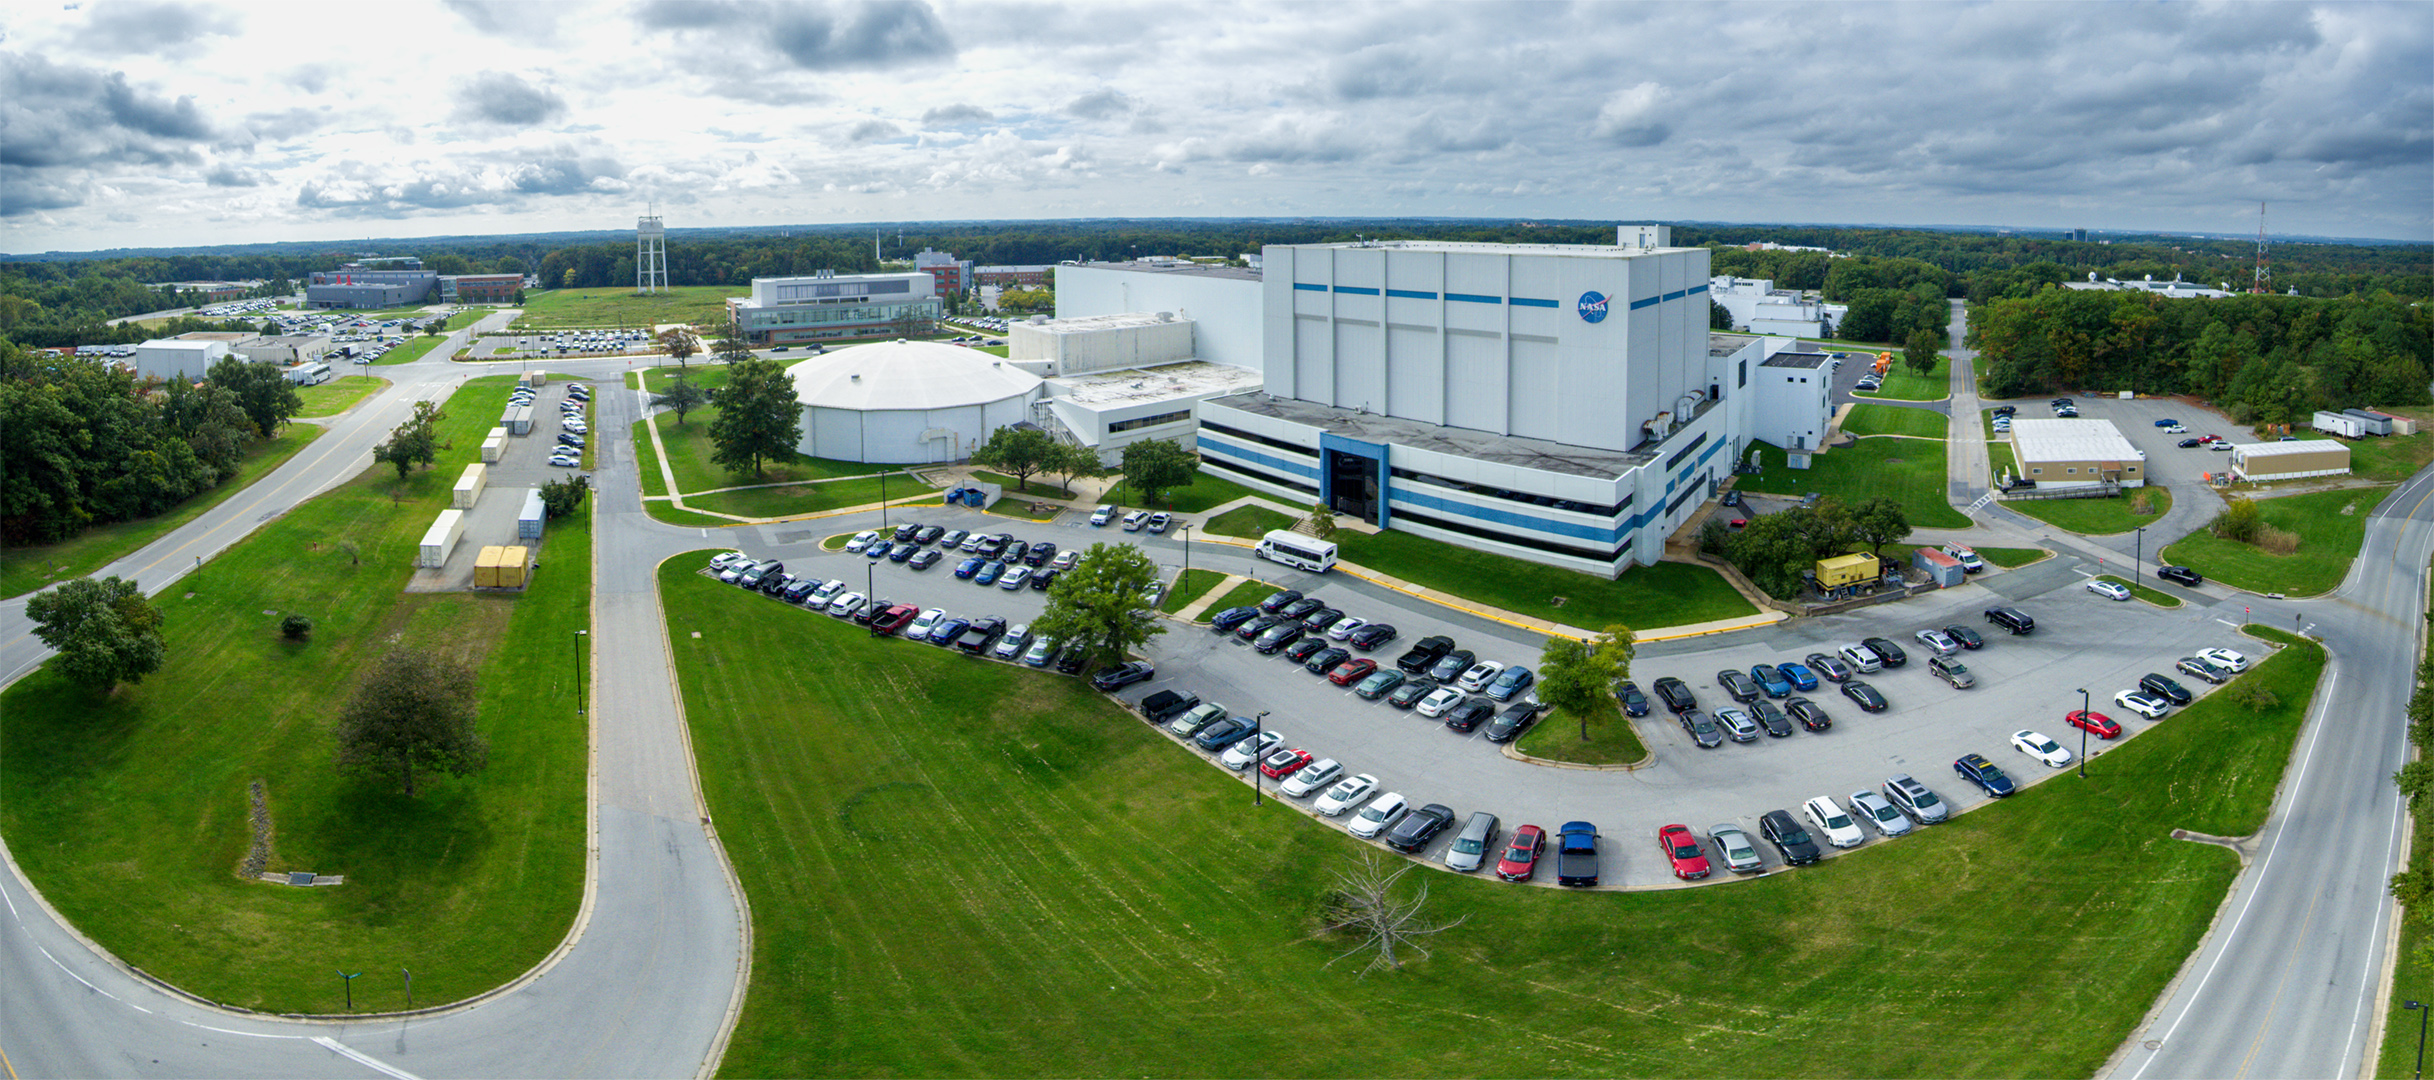 Building 29, home of the largest high-bay clean room in the world, stands prominently in this panoramic aerial view of NASA's Goddard Space Flight Center in Greenbelt, Maryland. The clean room is as tall as an eight-story building and as wide as two basketball courts. The circular structure left of center houses the High Capacity Centrifuge, which is used to simulate launch and landing loads on spacecraft hardware. Imaged Oct. 5, 2023, looking south-southwest.Credit: NASA/Francis Reddy